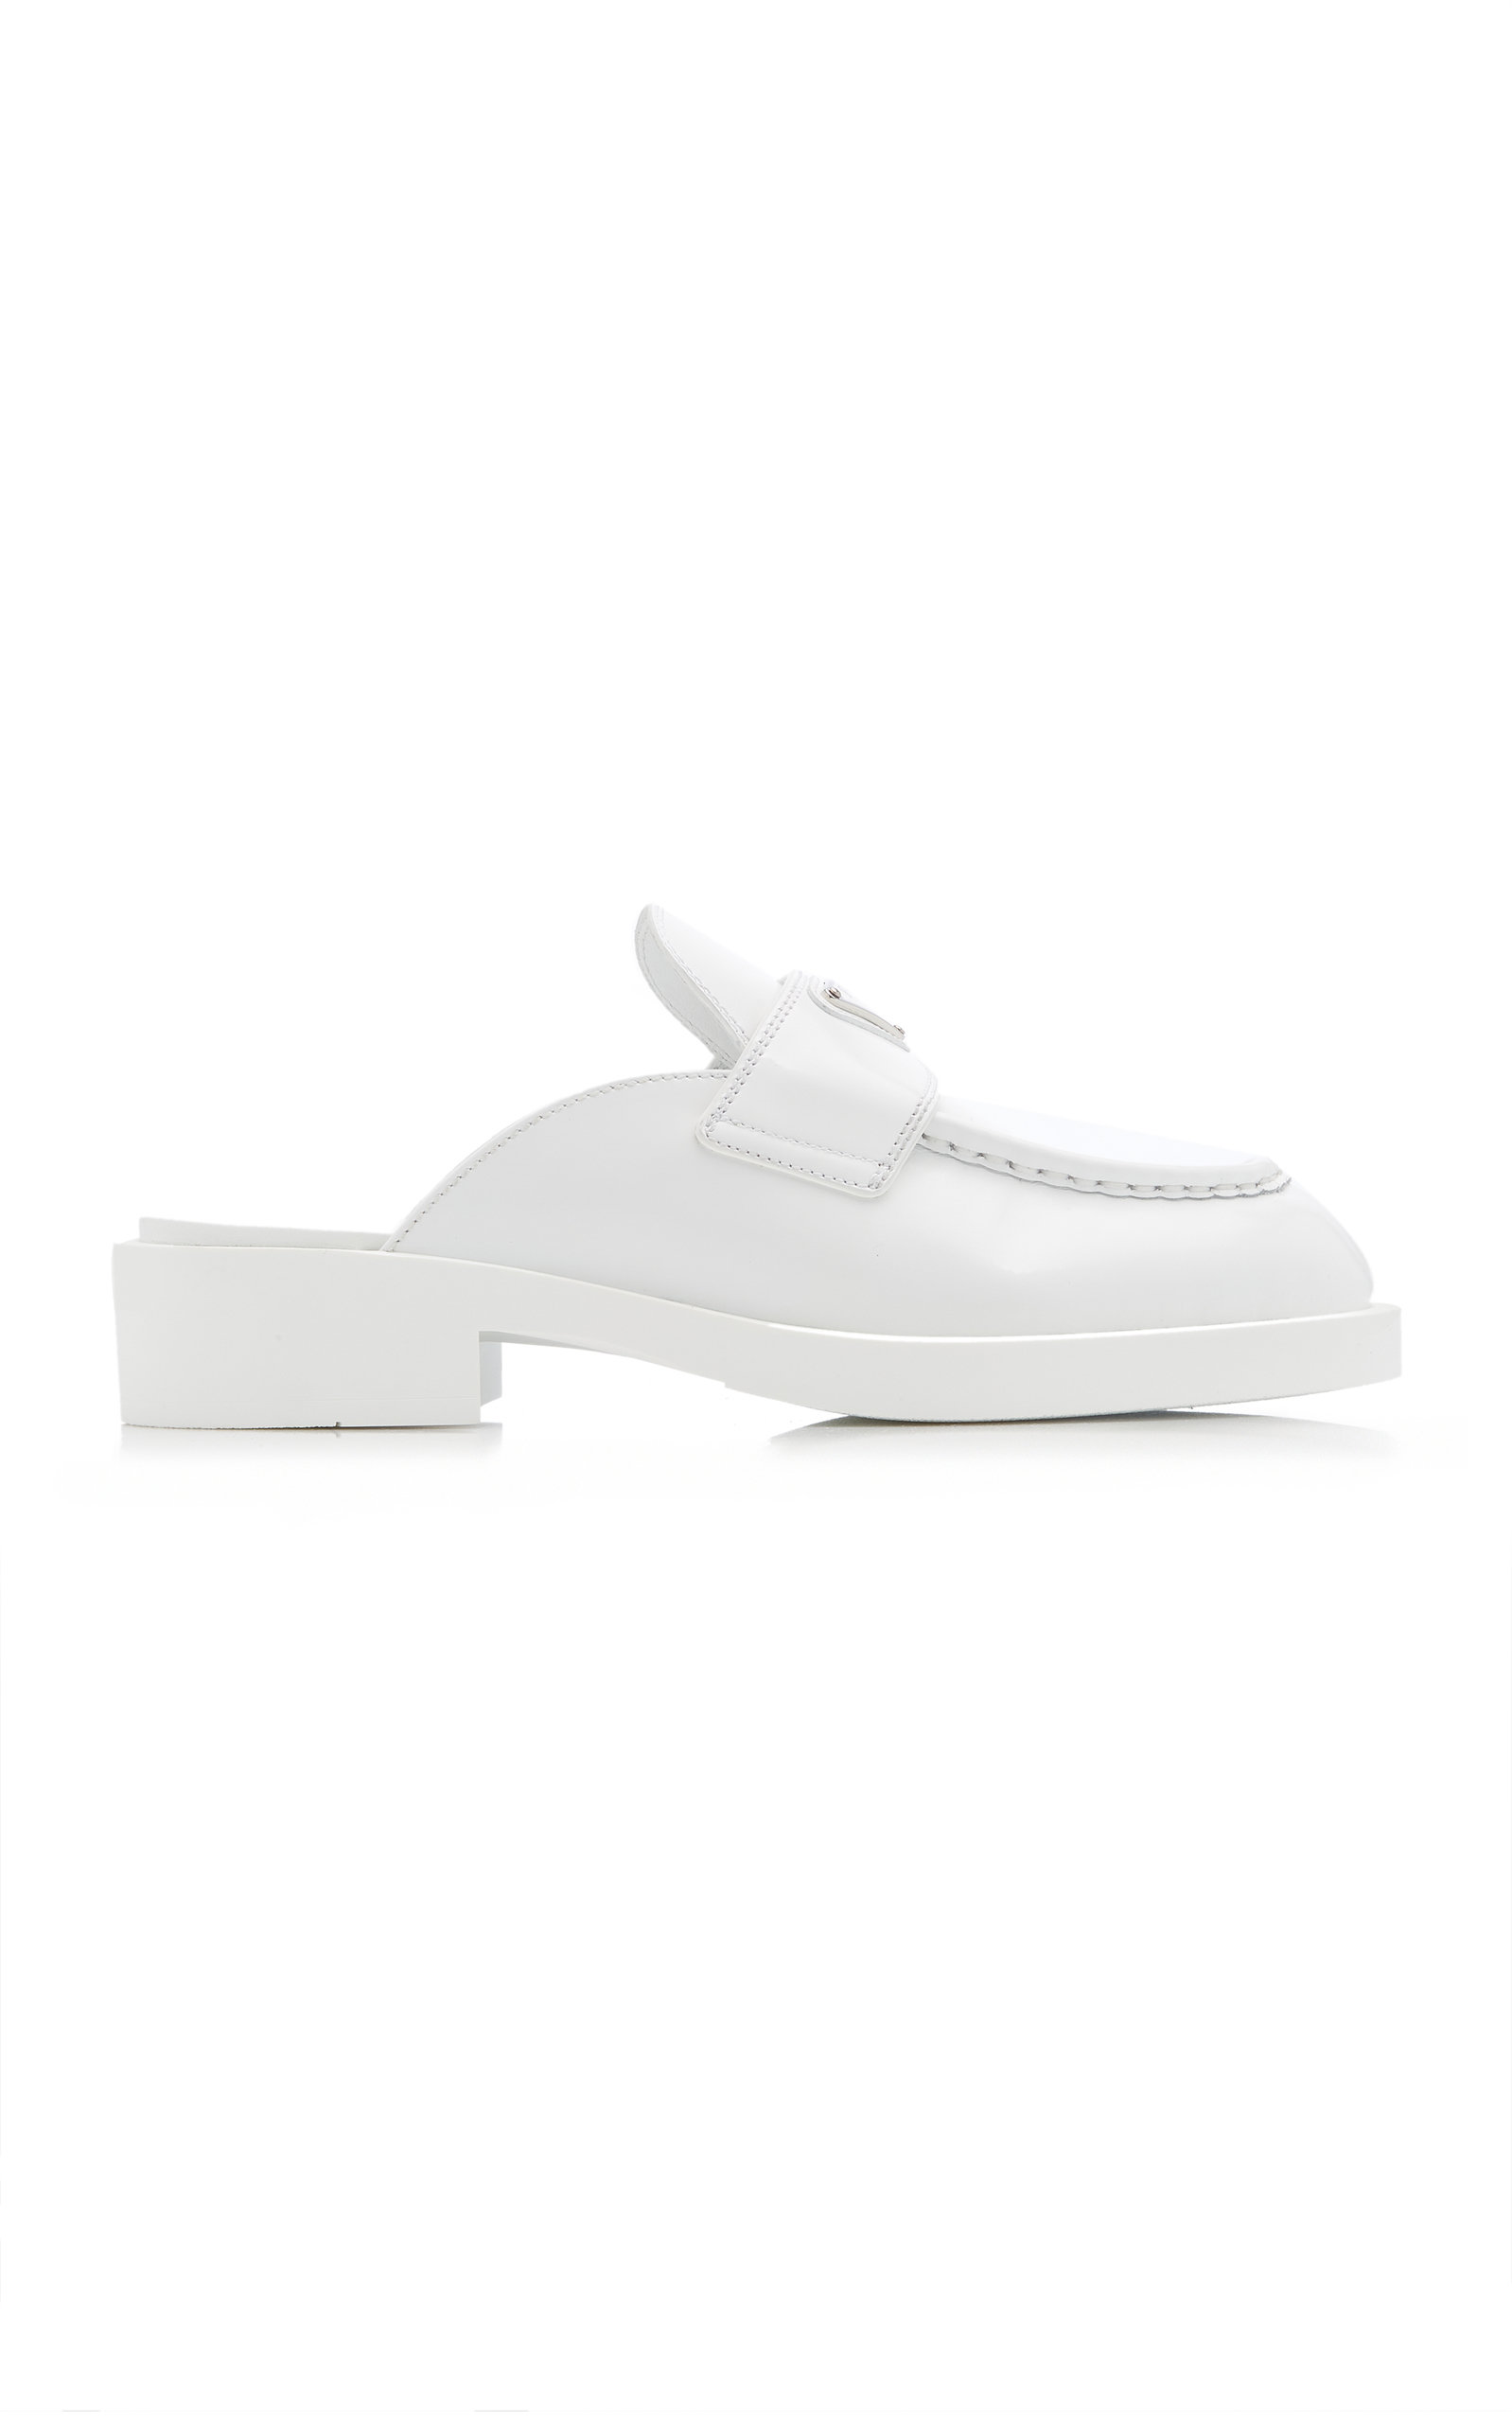 Prada Women's Leather Loafer Mules In Bianco